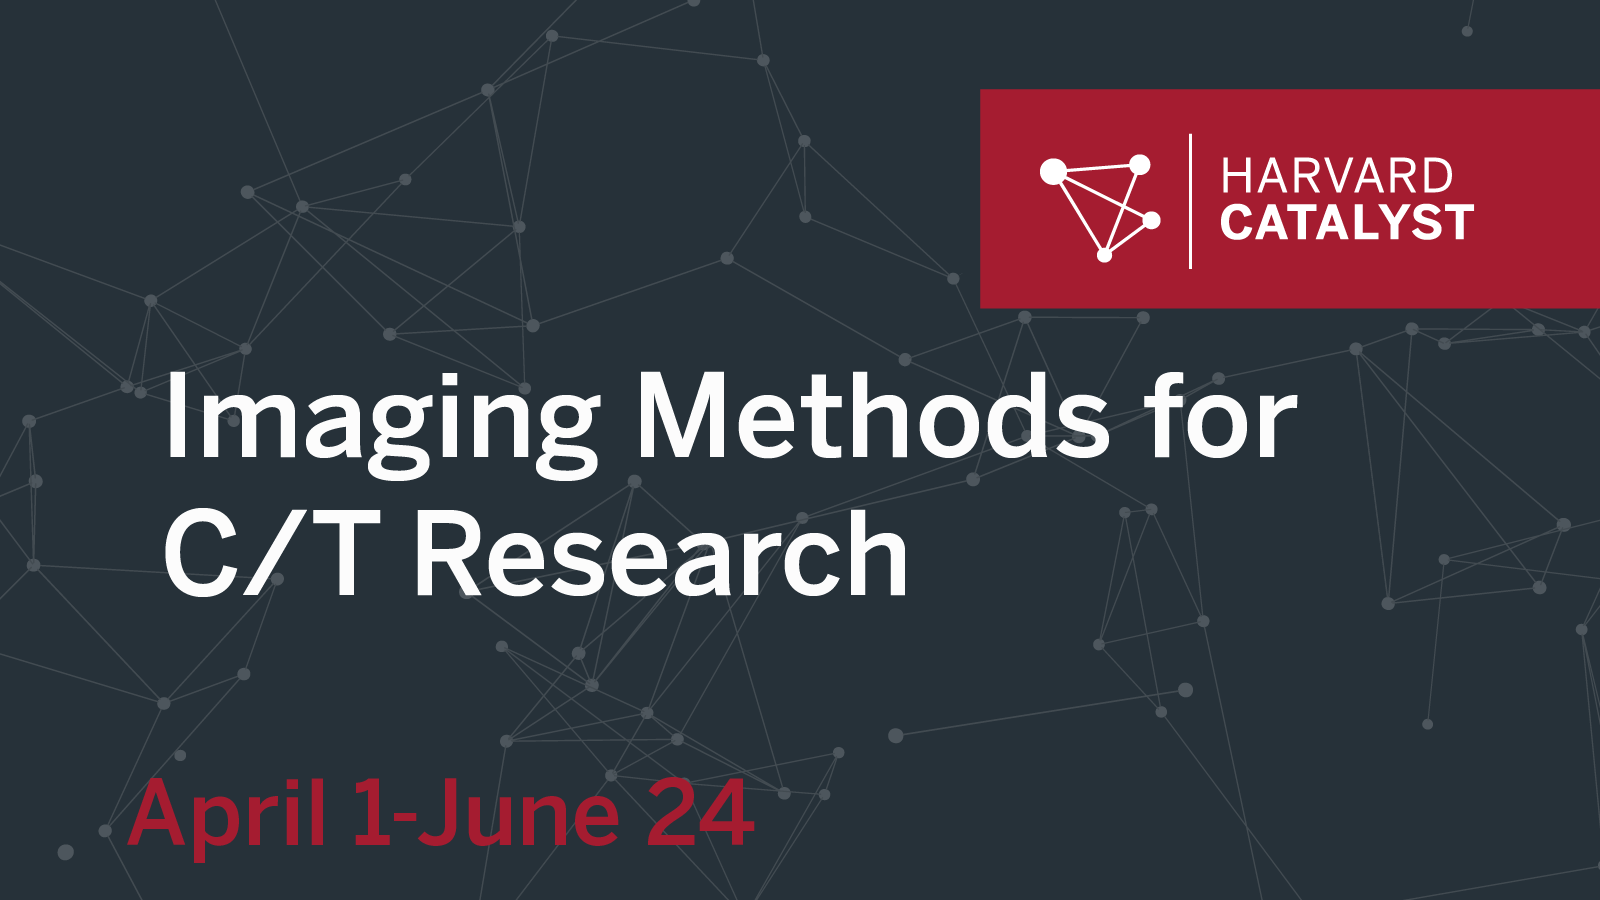 Imaging Methods for c/t research course graphic with dates and Harvard Catalyst logo